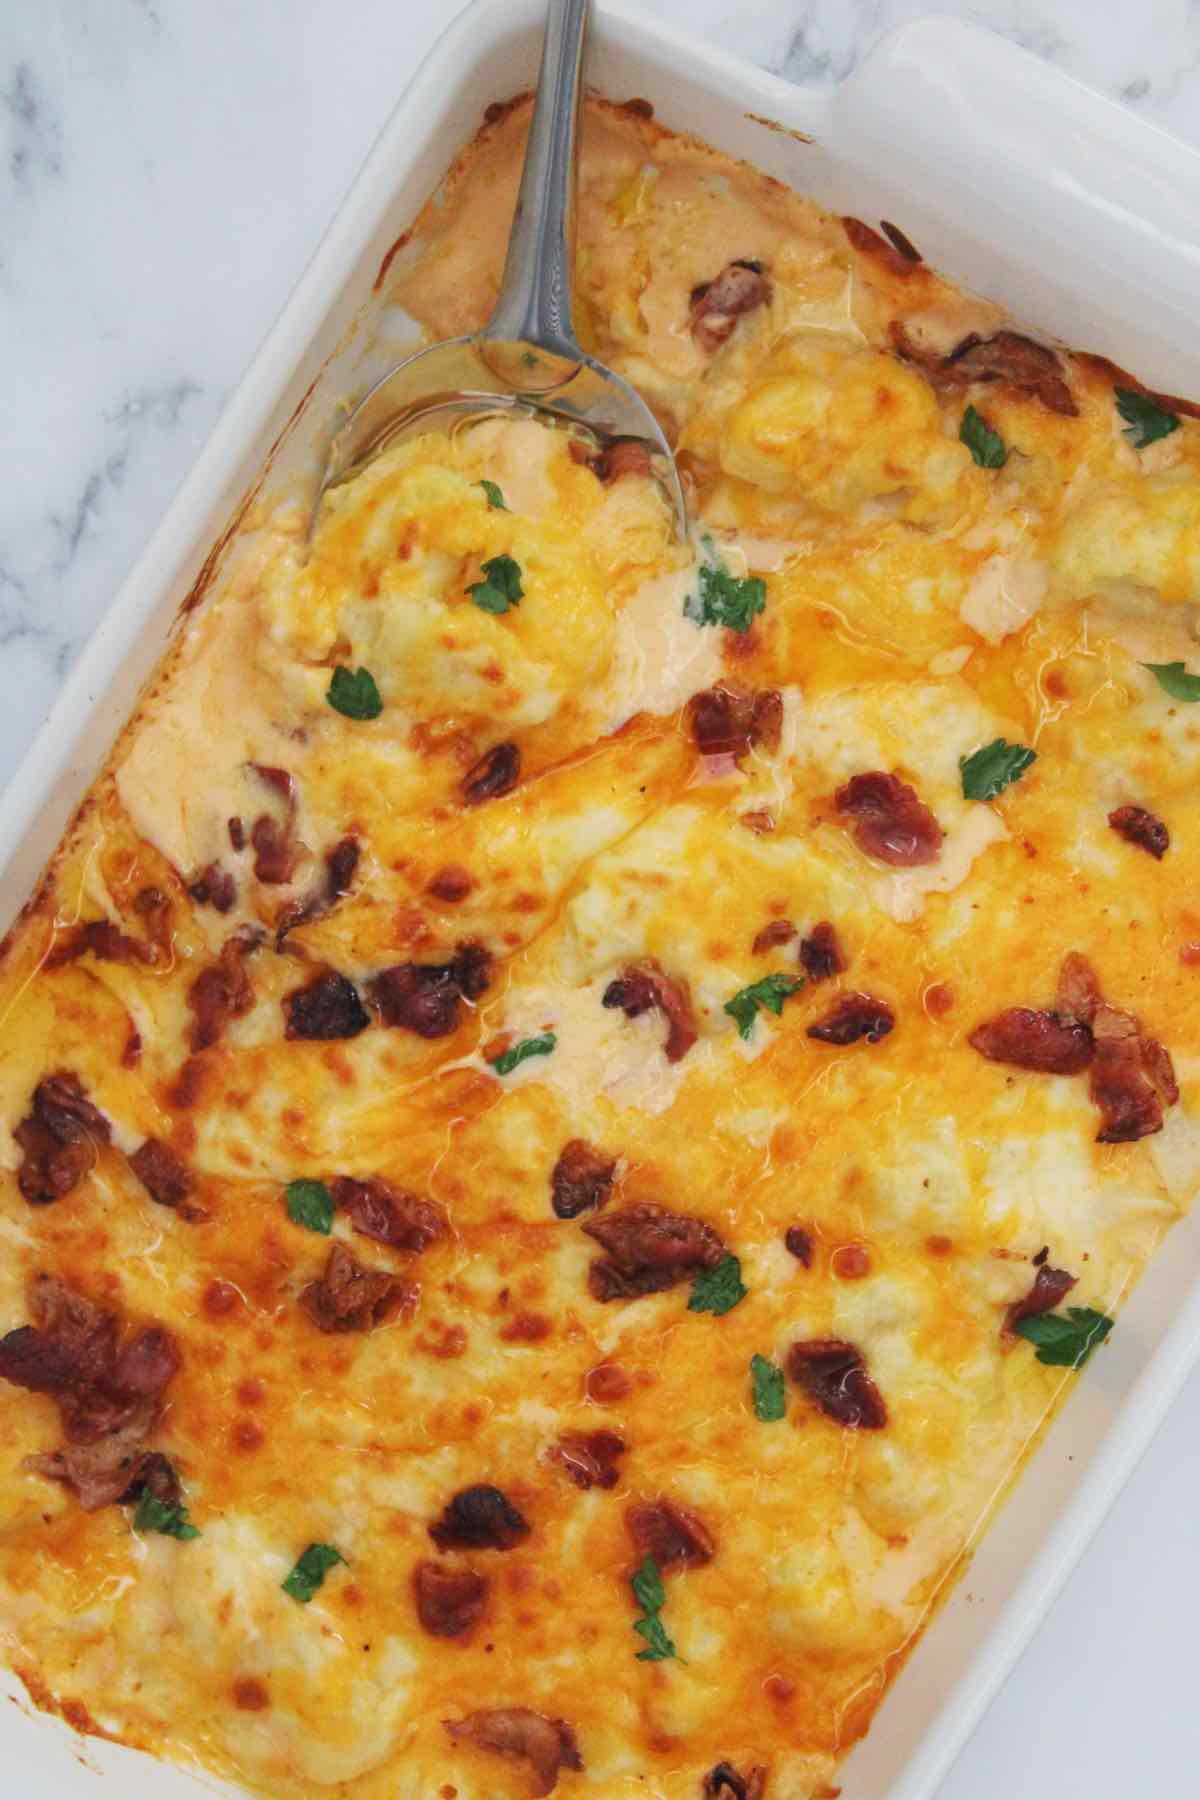 This keto and low carb macaroni and cheese is the ultimate comfort food.